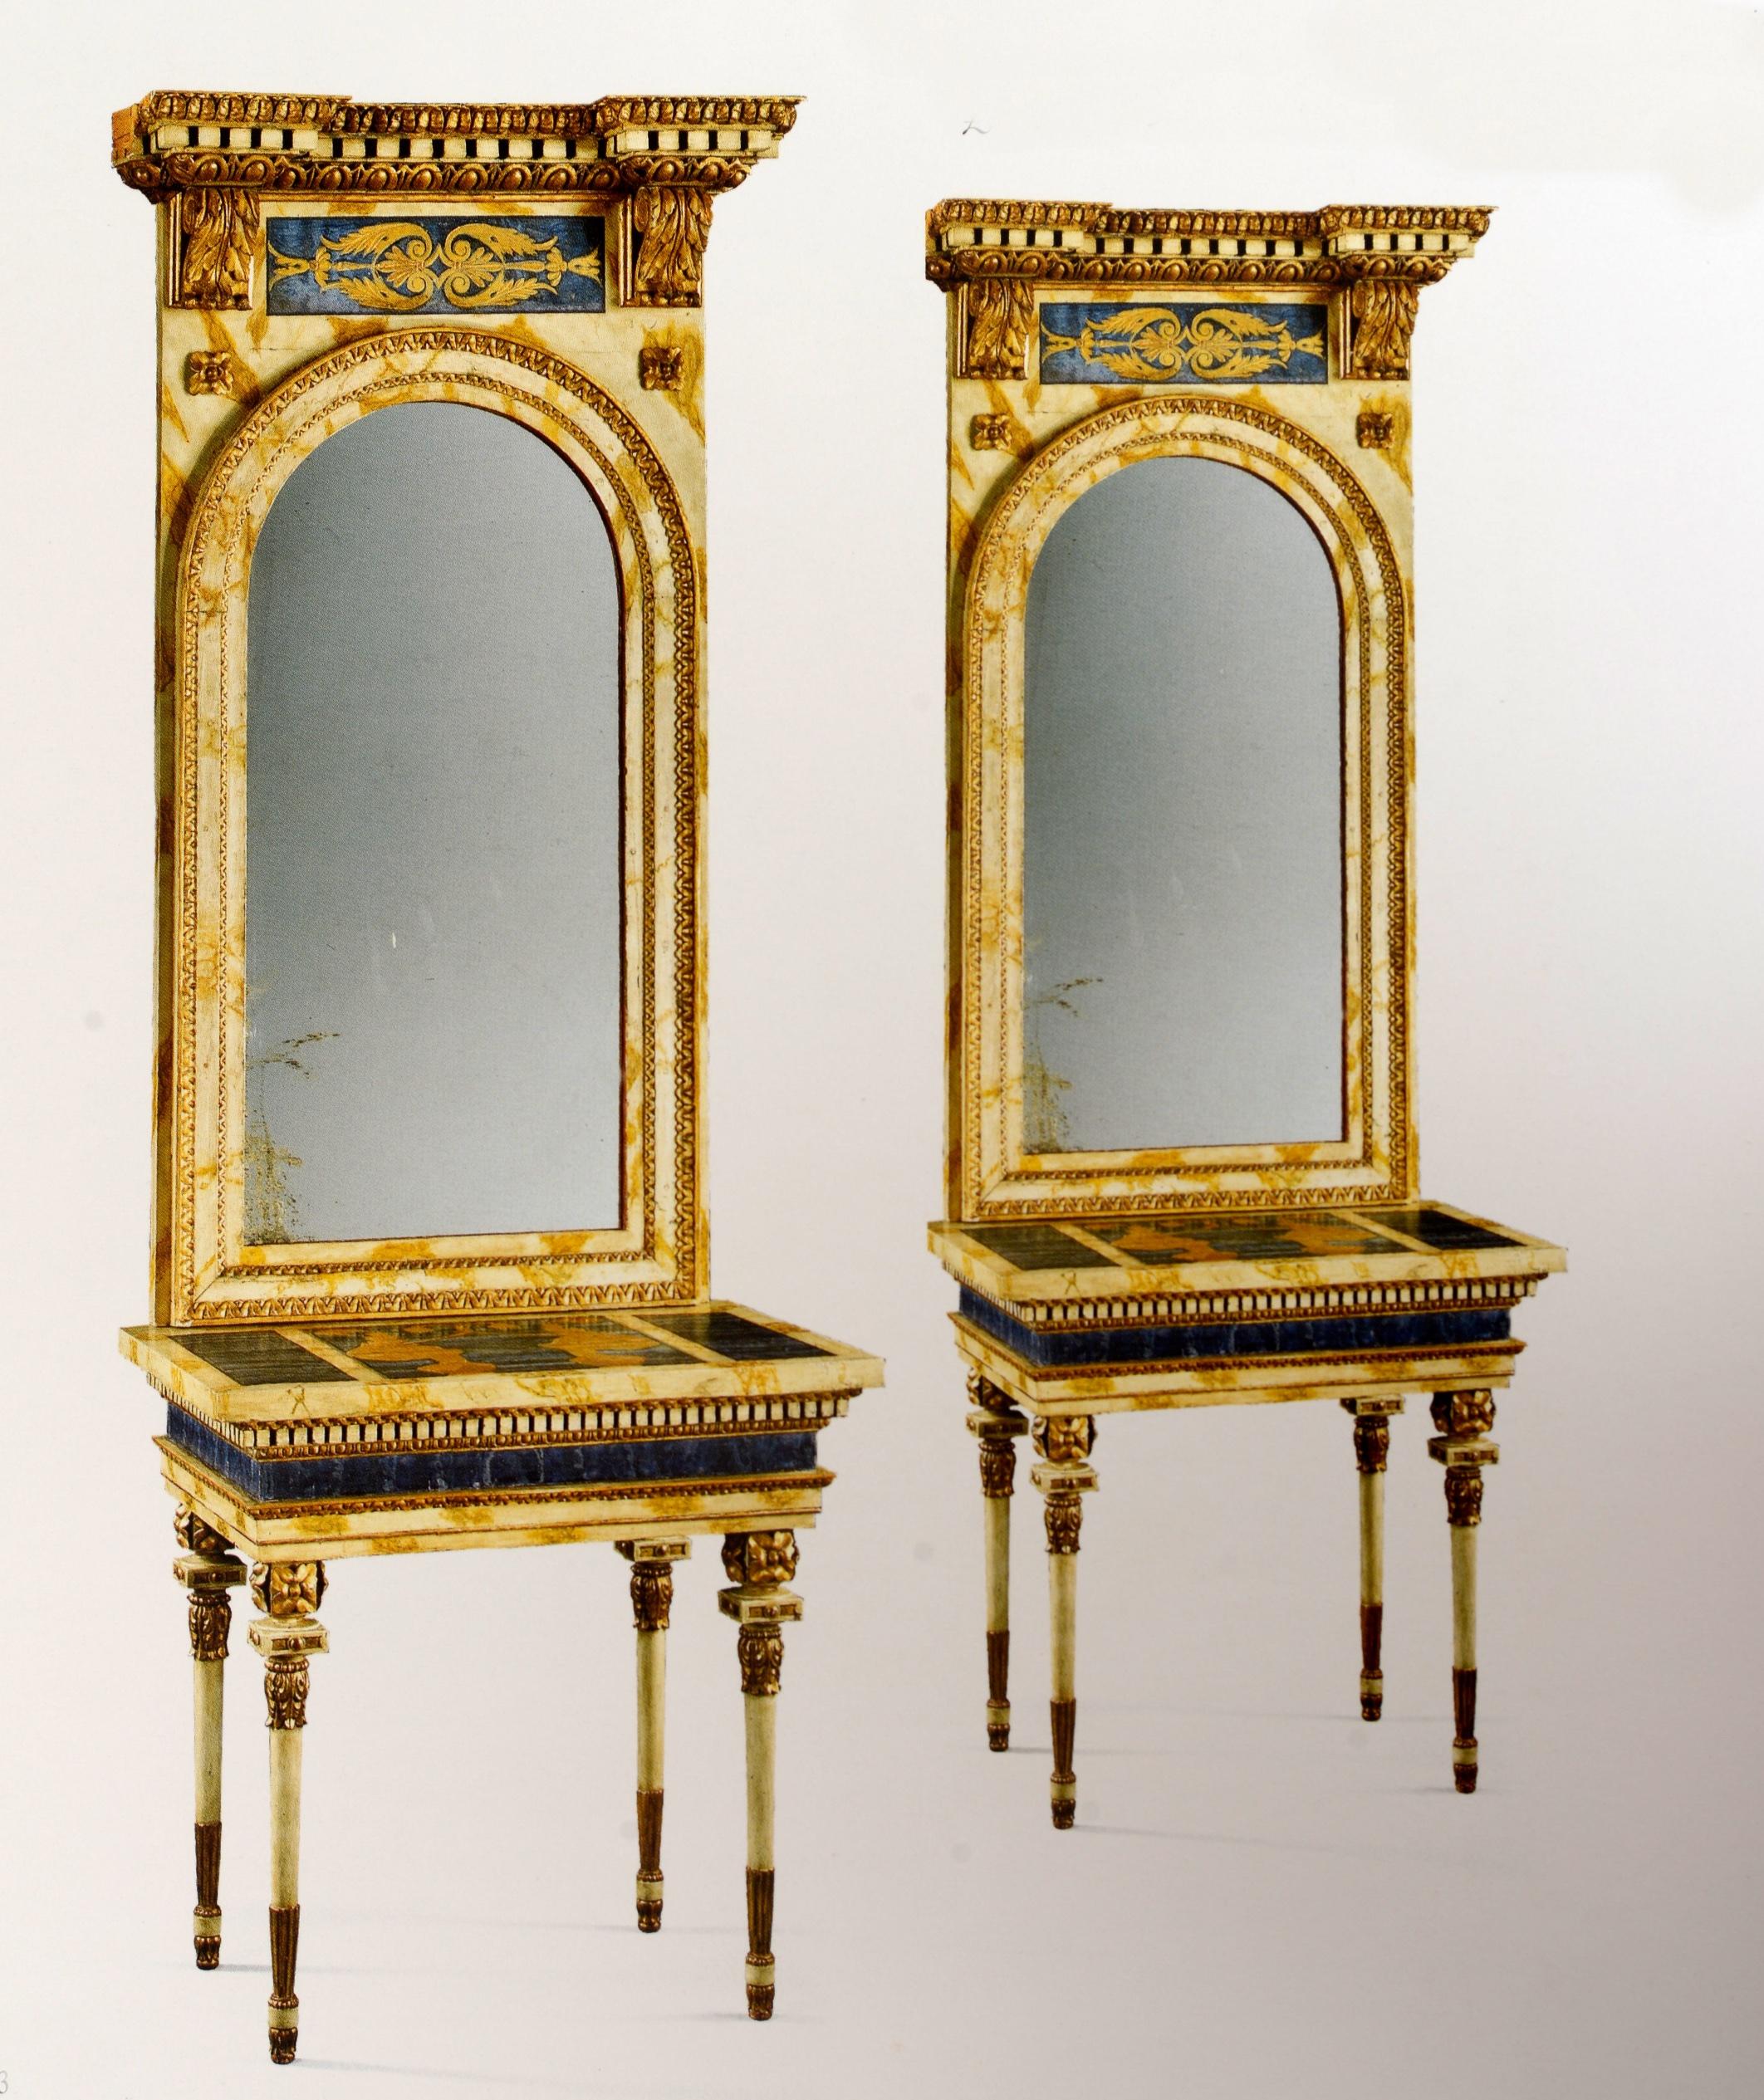 Christie's, Important European Furniture & a Collection of Magnificent Mirrors For Sale 8